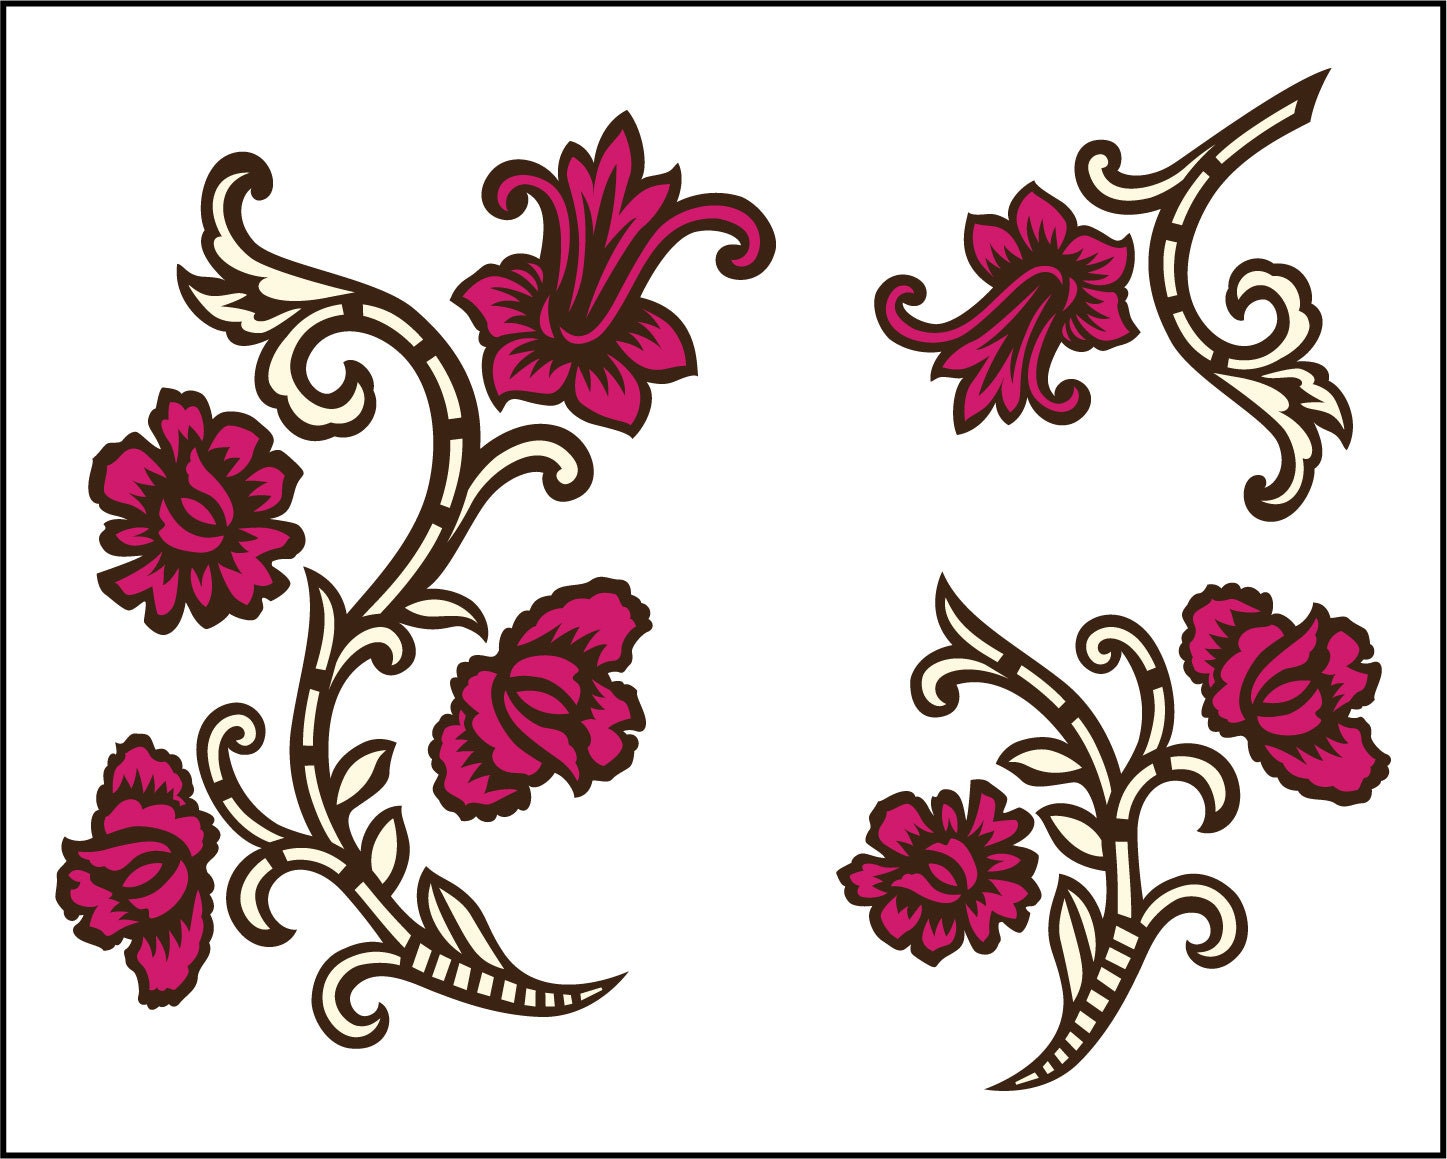 Download Floral Spray Collection With Flourish Cut Files In SVG EPS DFX